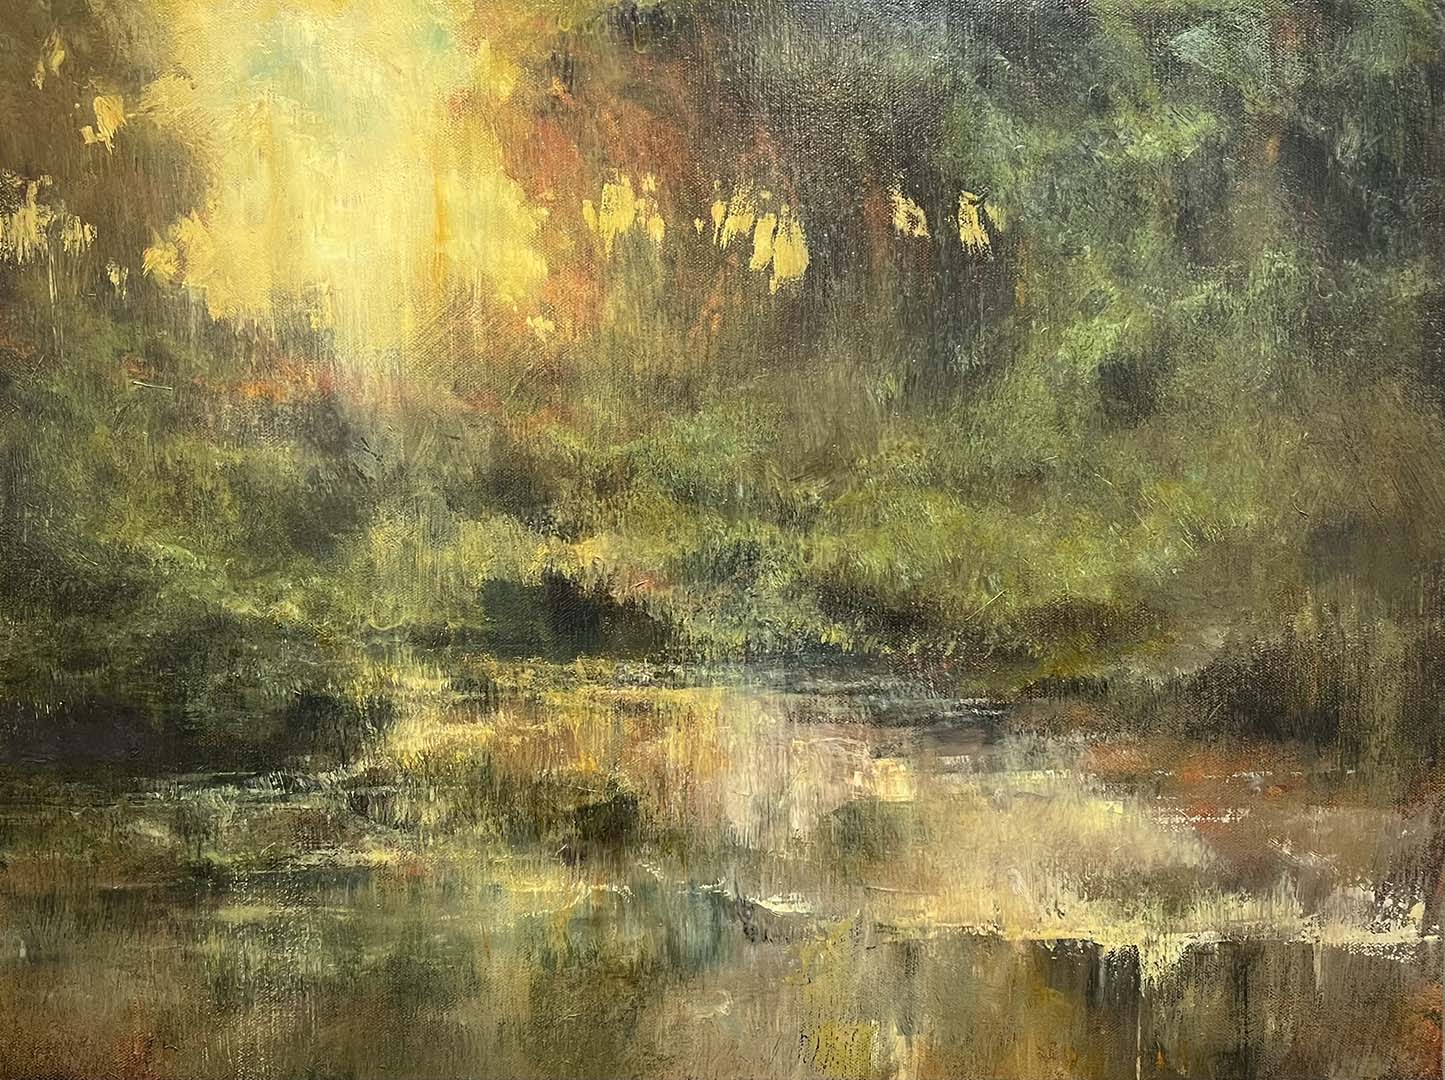 oil painting on canvas of a landscape with reflective water and trees with the sun shining through